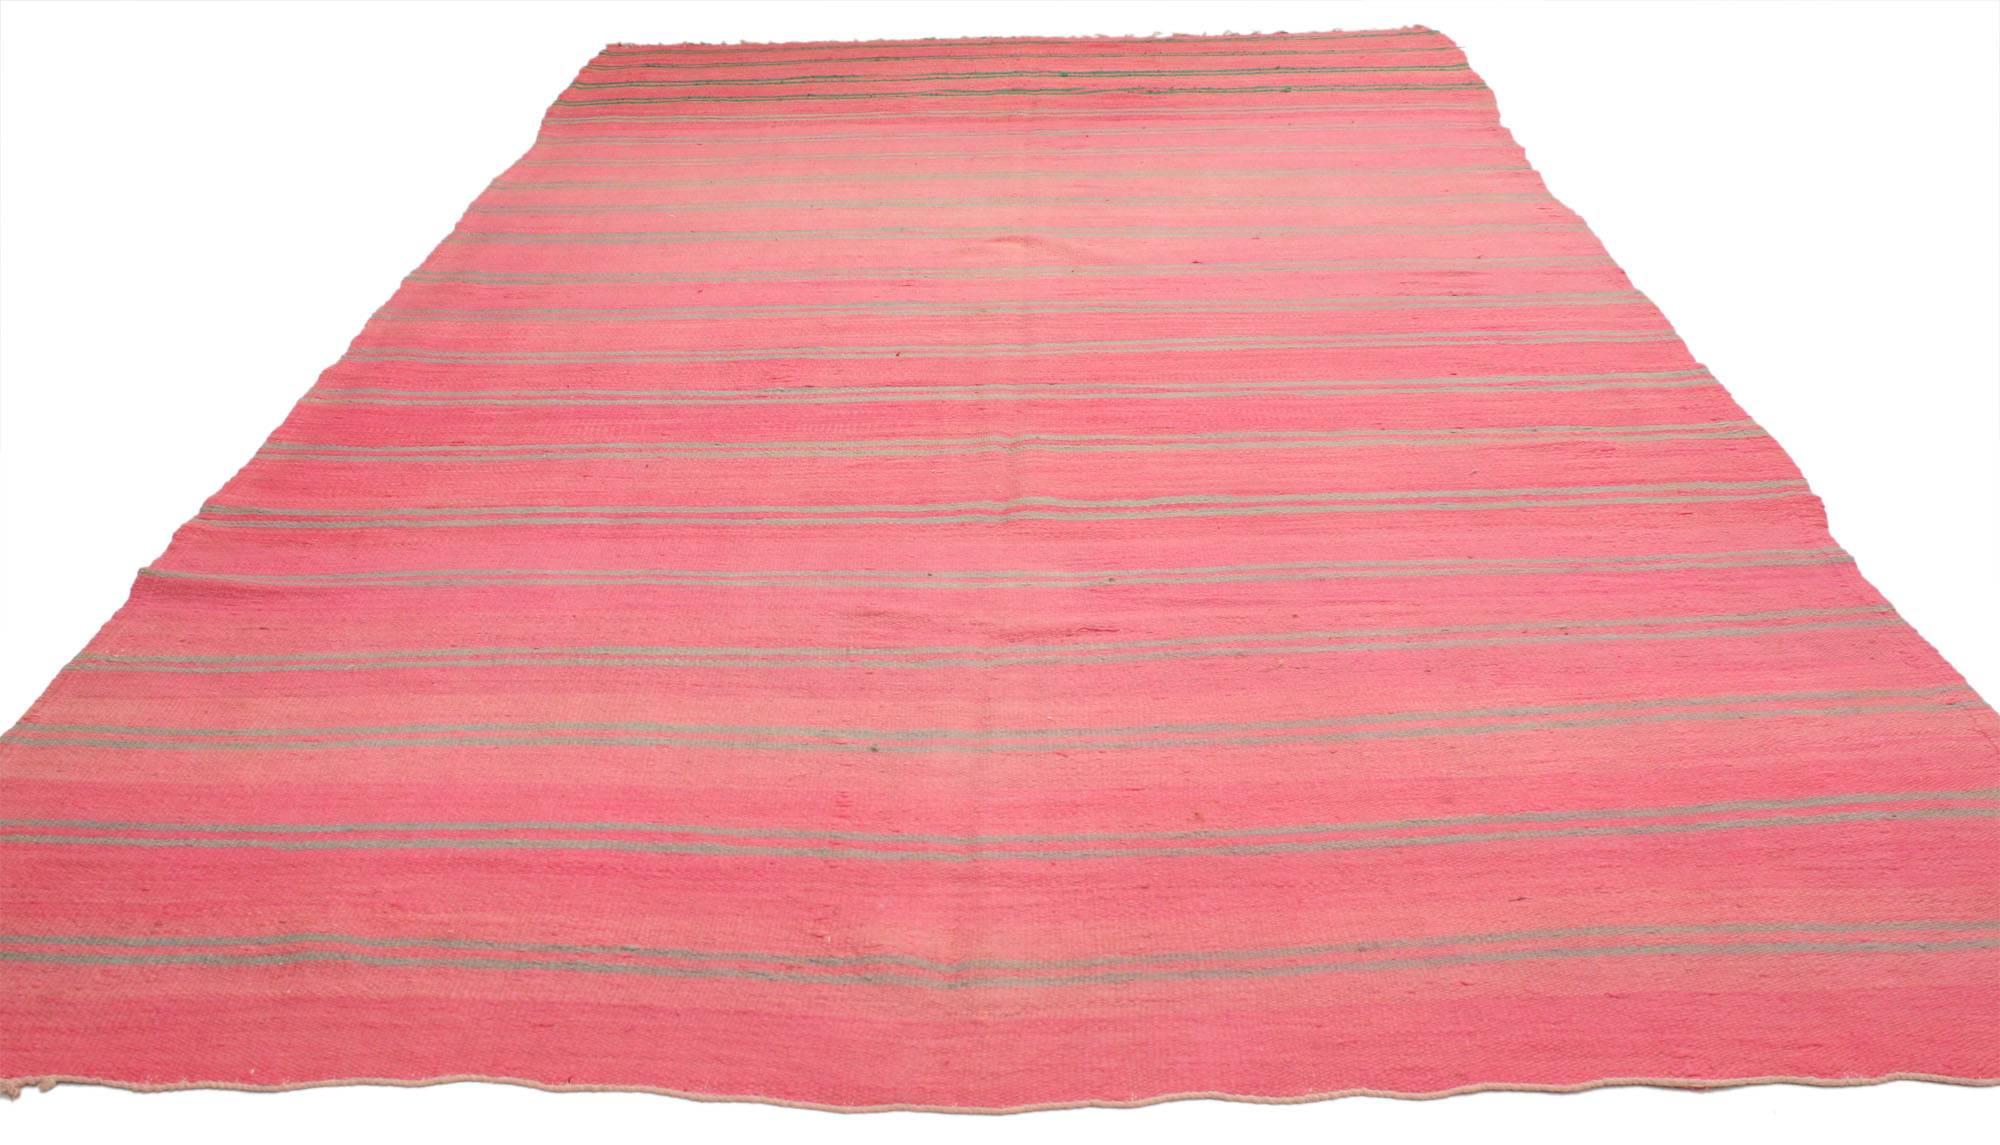 20535, Boho Chic vintage Berber Moroccan Kilim rug with stripes. This handwoven wool Vintage Berber Moroccan Kilim rug with stripes and Boho Chic style is rendered in variegated shades of coral, salmon, pink, mint and green. The bohemian vibe,